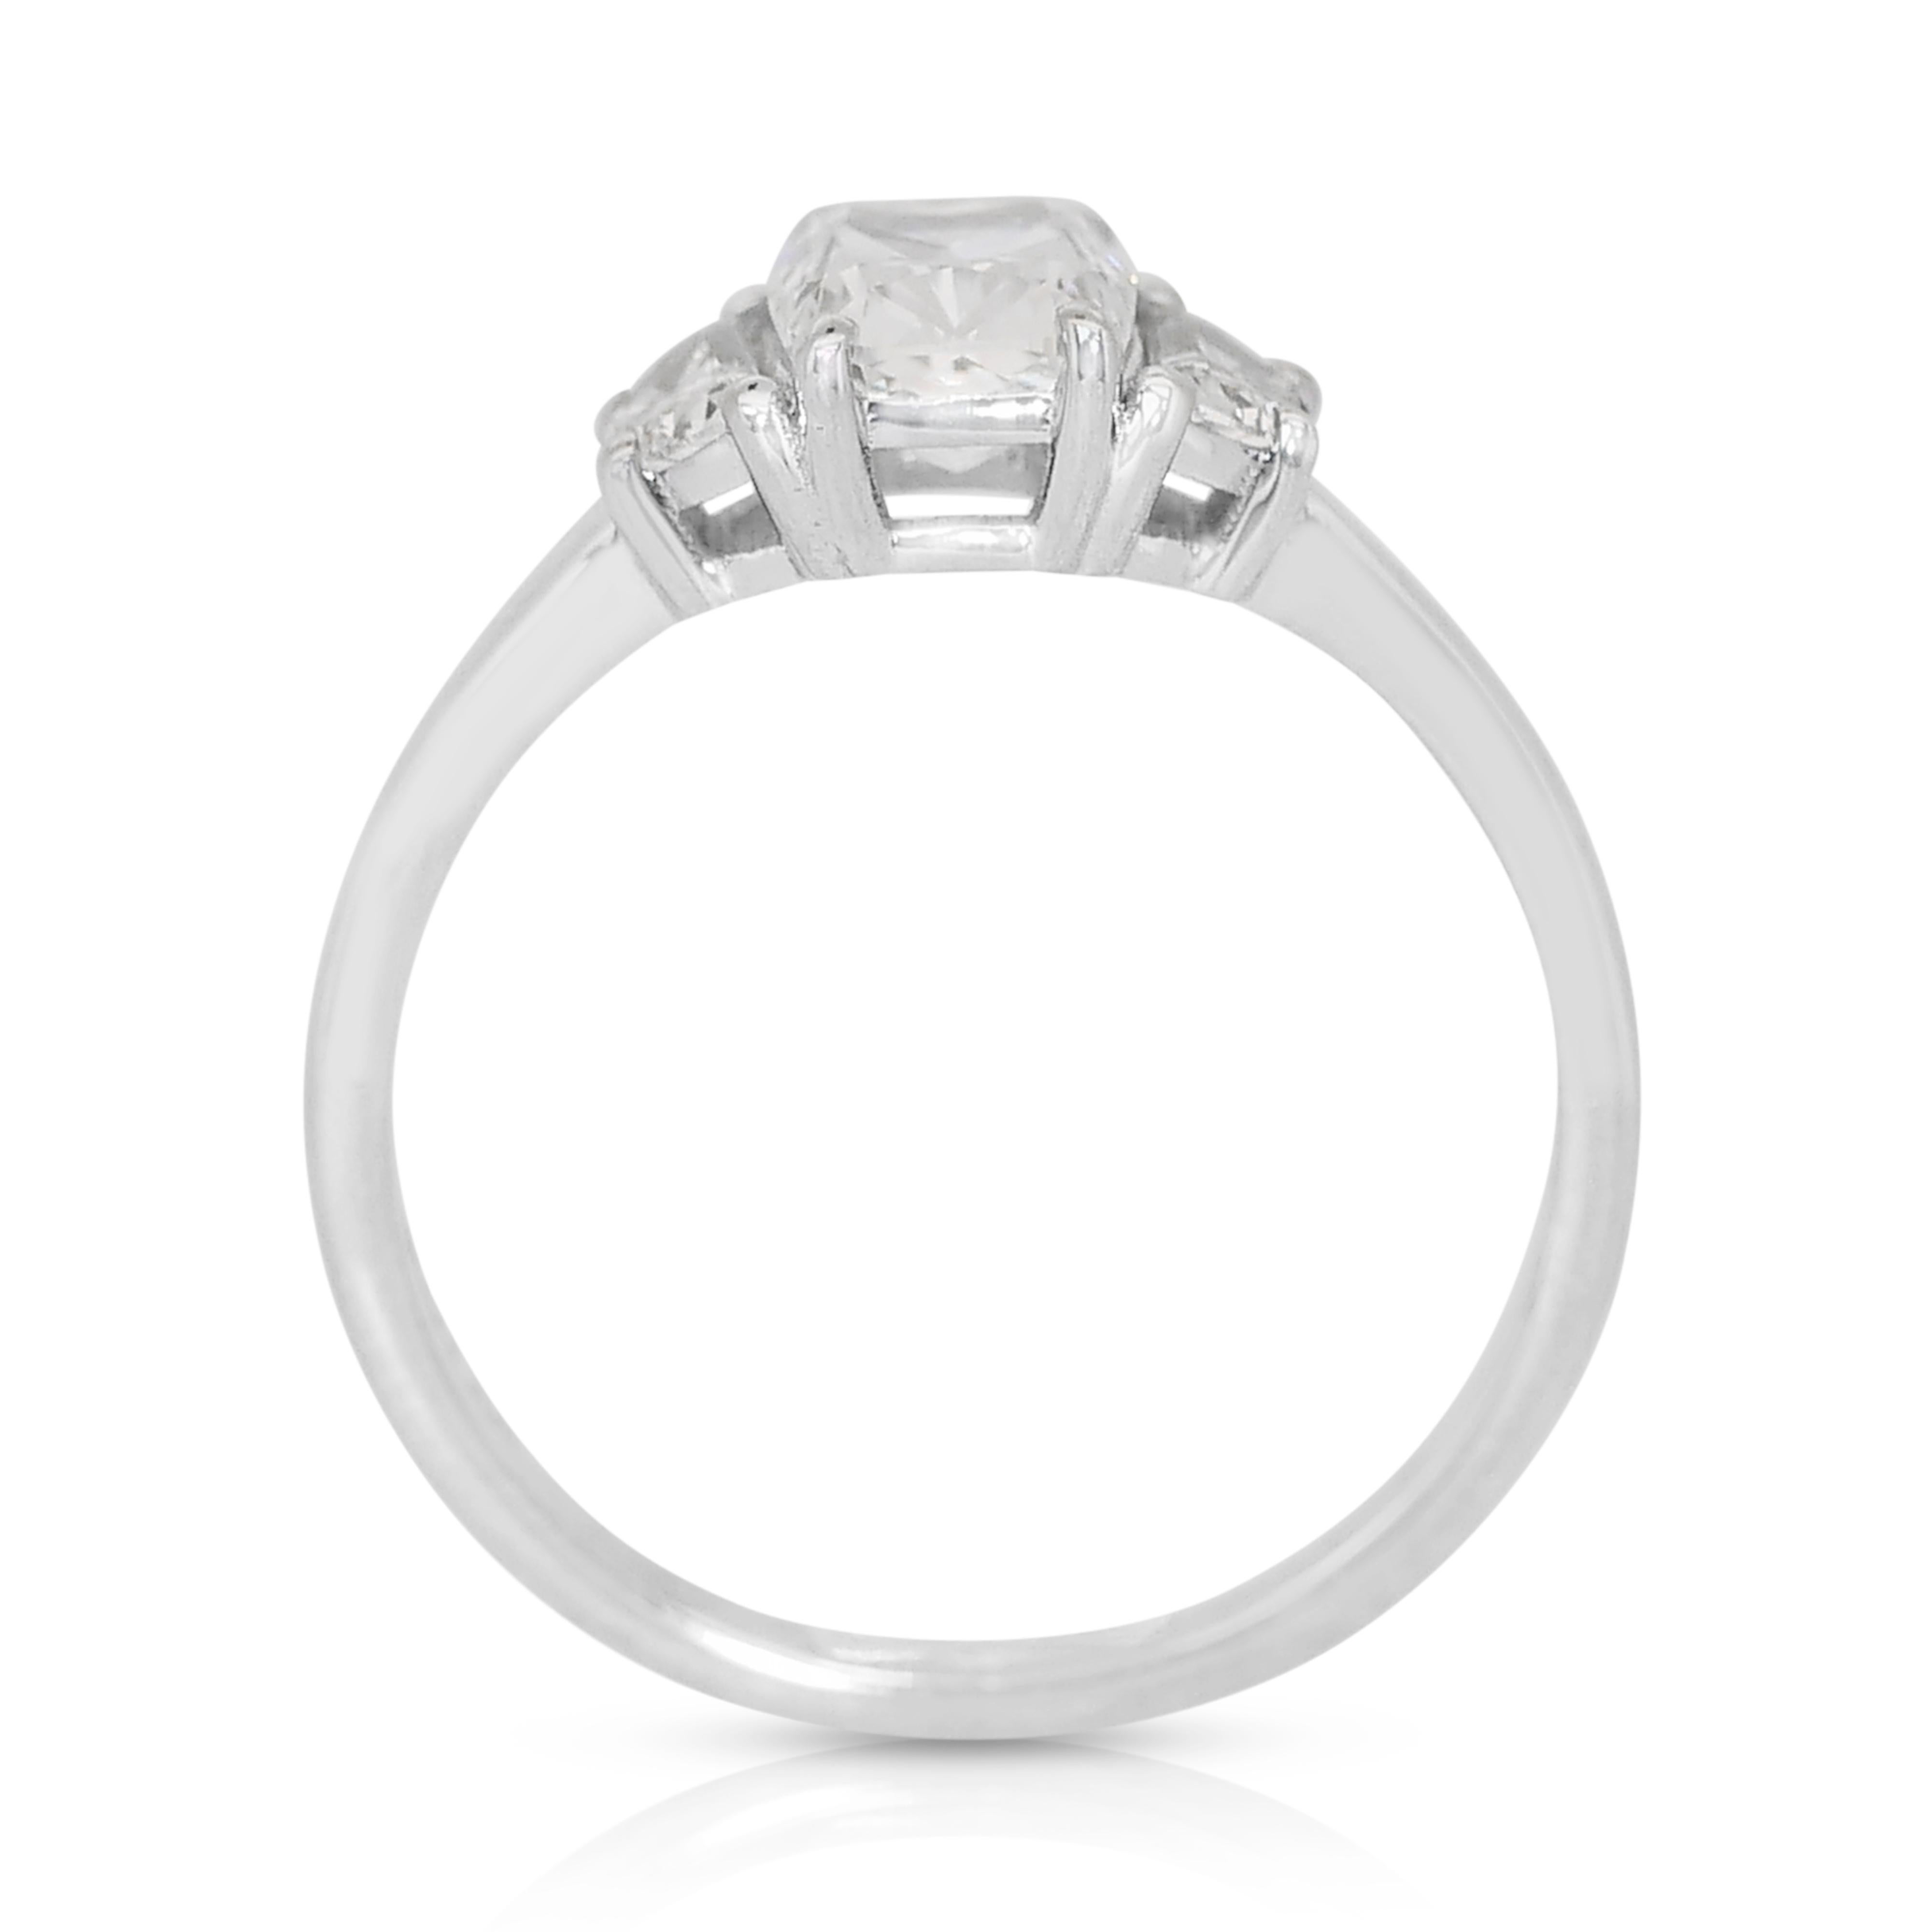 Glamorous 18K White Gold Natural Diamond Ring with 1.25 ct - GIA & AIG Certified In New Condition For Sale In רמת גן, IL